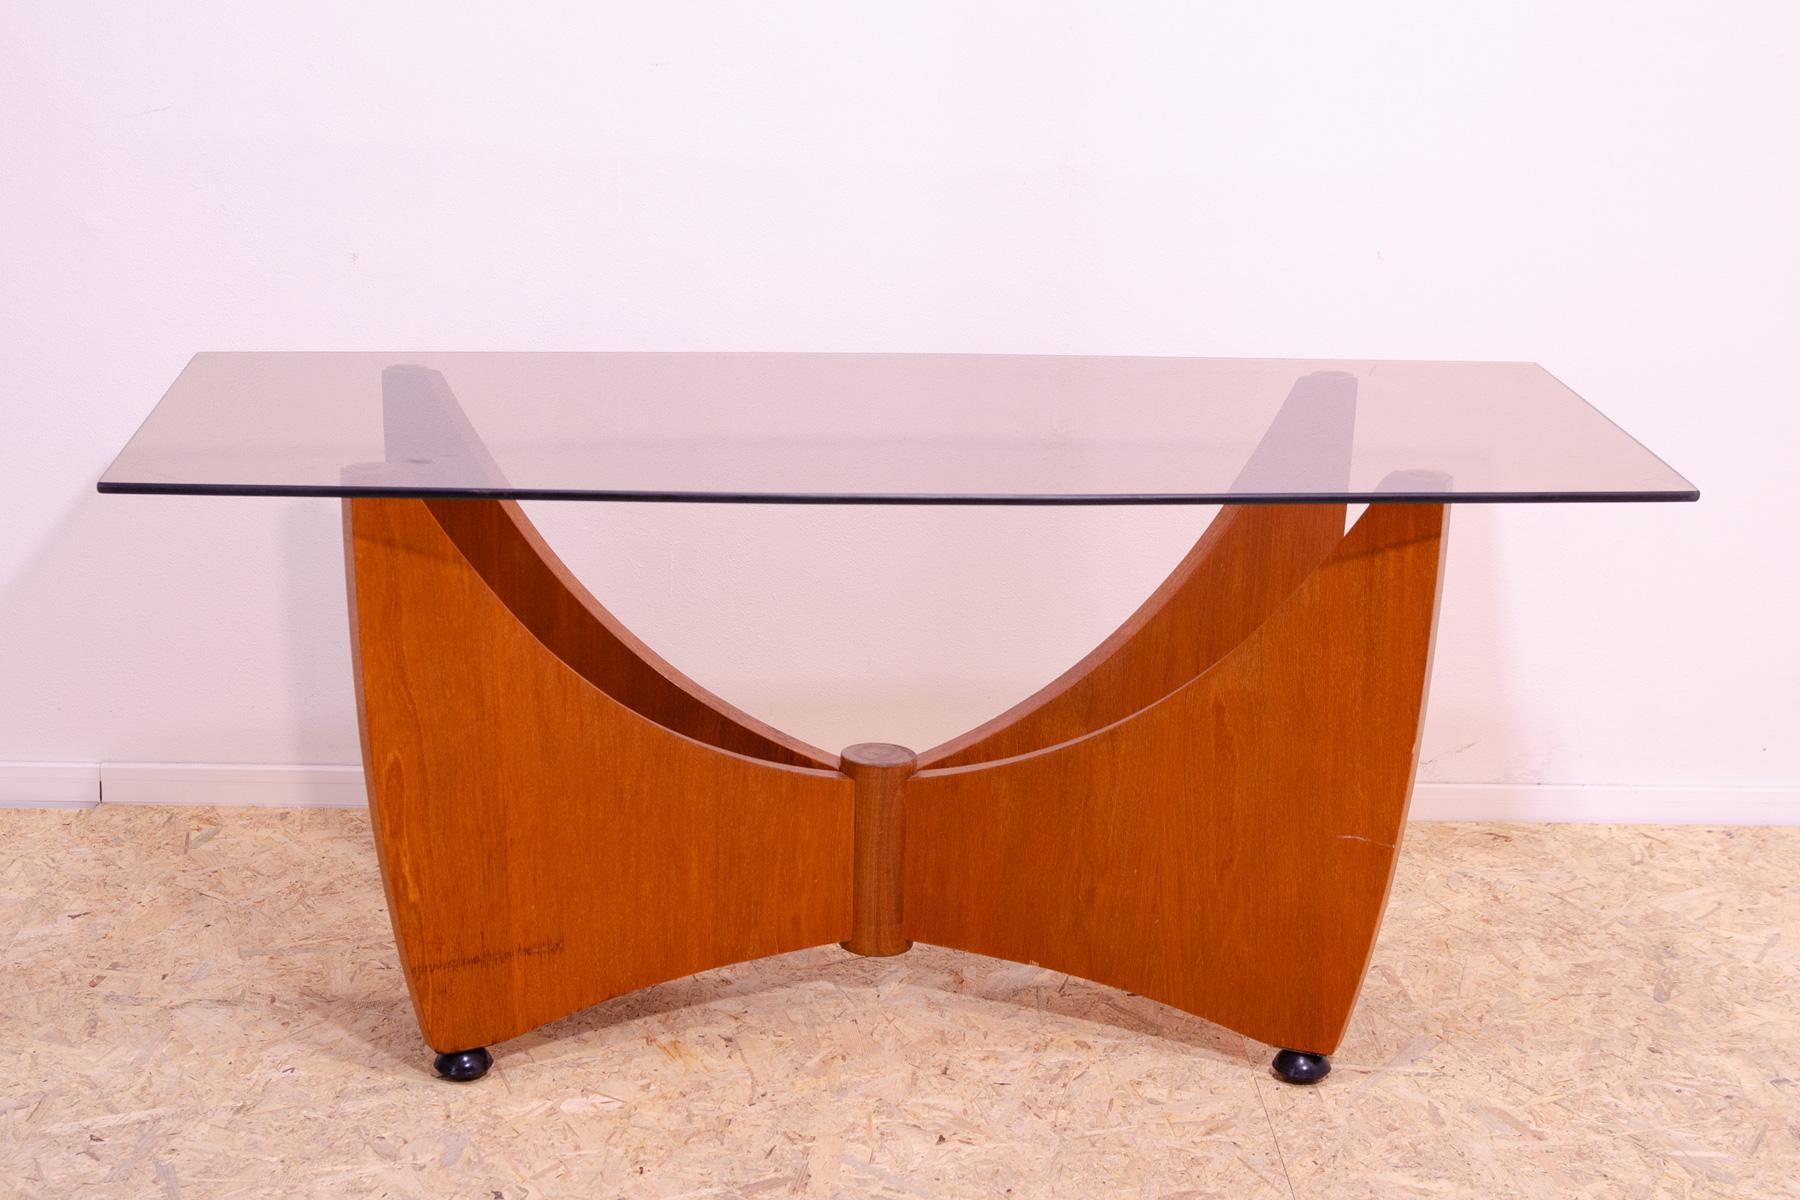 This coffee table was made in the former Czechoslovakia in the 1980´s as a part of a living room.
Its design is elegant and modern.

It has interestingly shaped legs with arched cutouts and a distinctive glass top.
This piece remains in very good